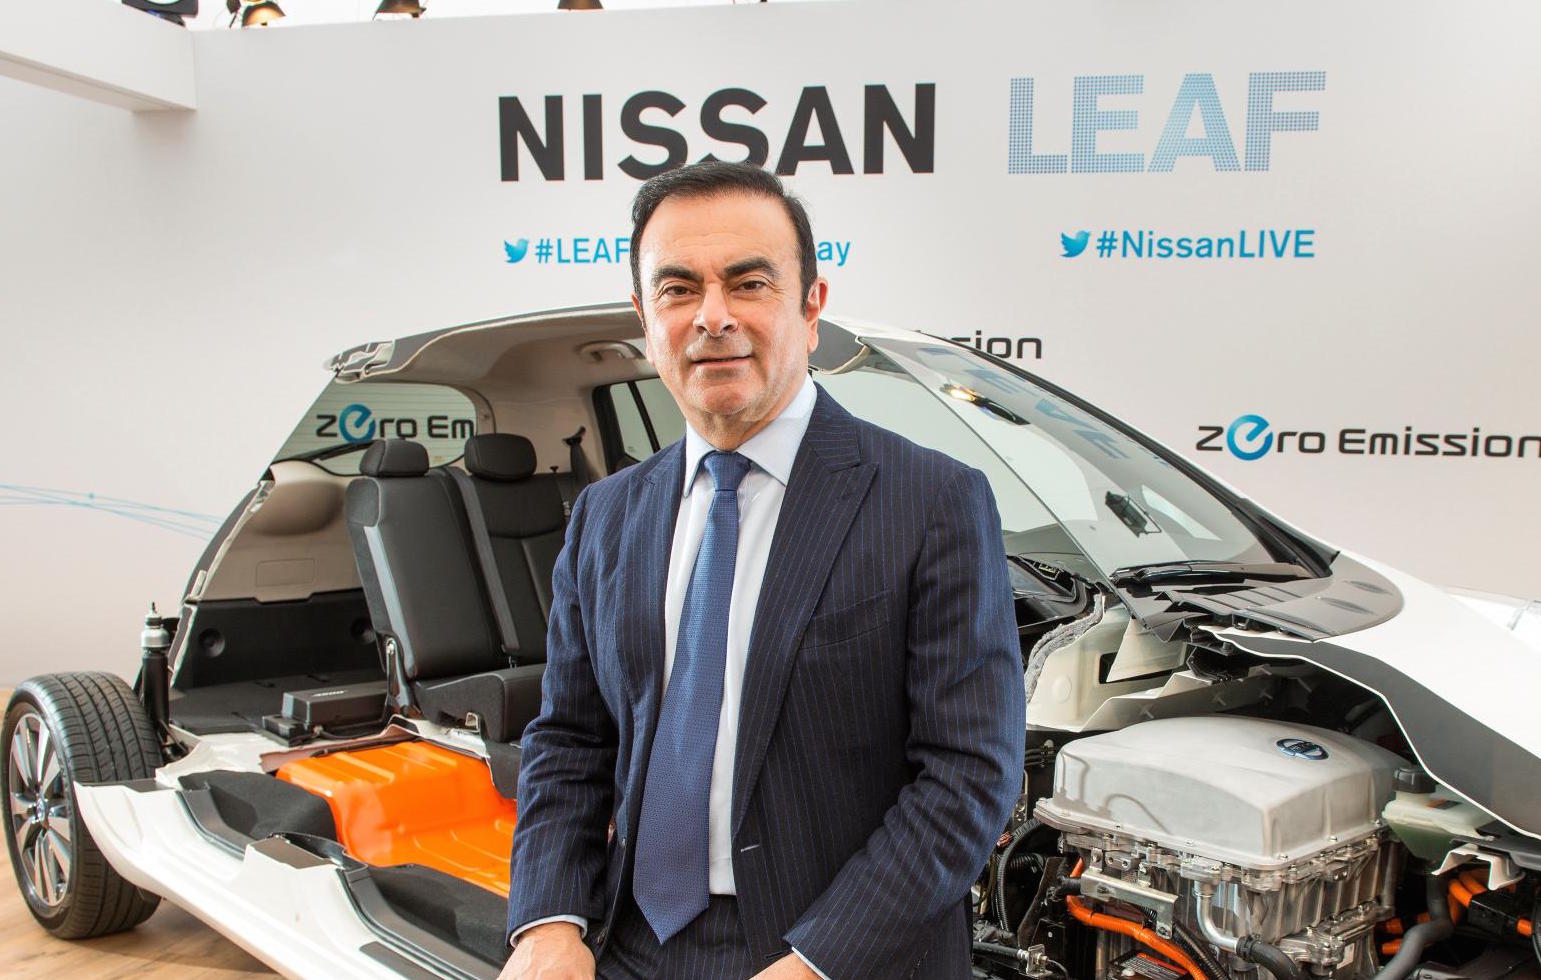 Nissan CEO Carlos Ghosn stands down, focus on alliance expansion